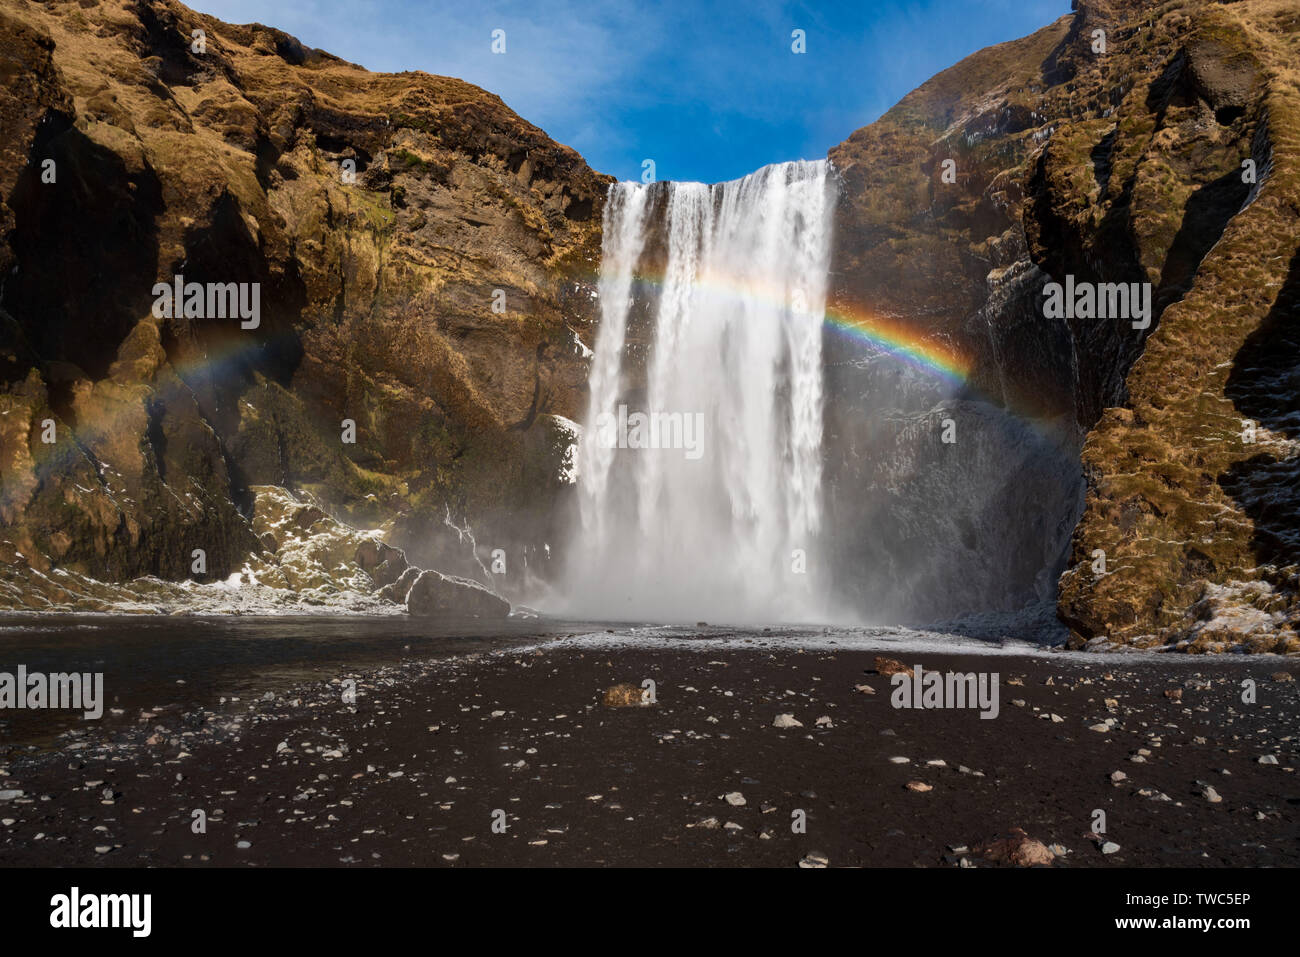 Skogafoss is one of Iceland’s biggest and most beautiful waterfalls with an astounding width of 25 meters and a drop of 60 meters, located in South Ic Stock Photo